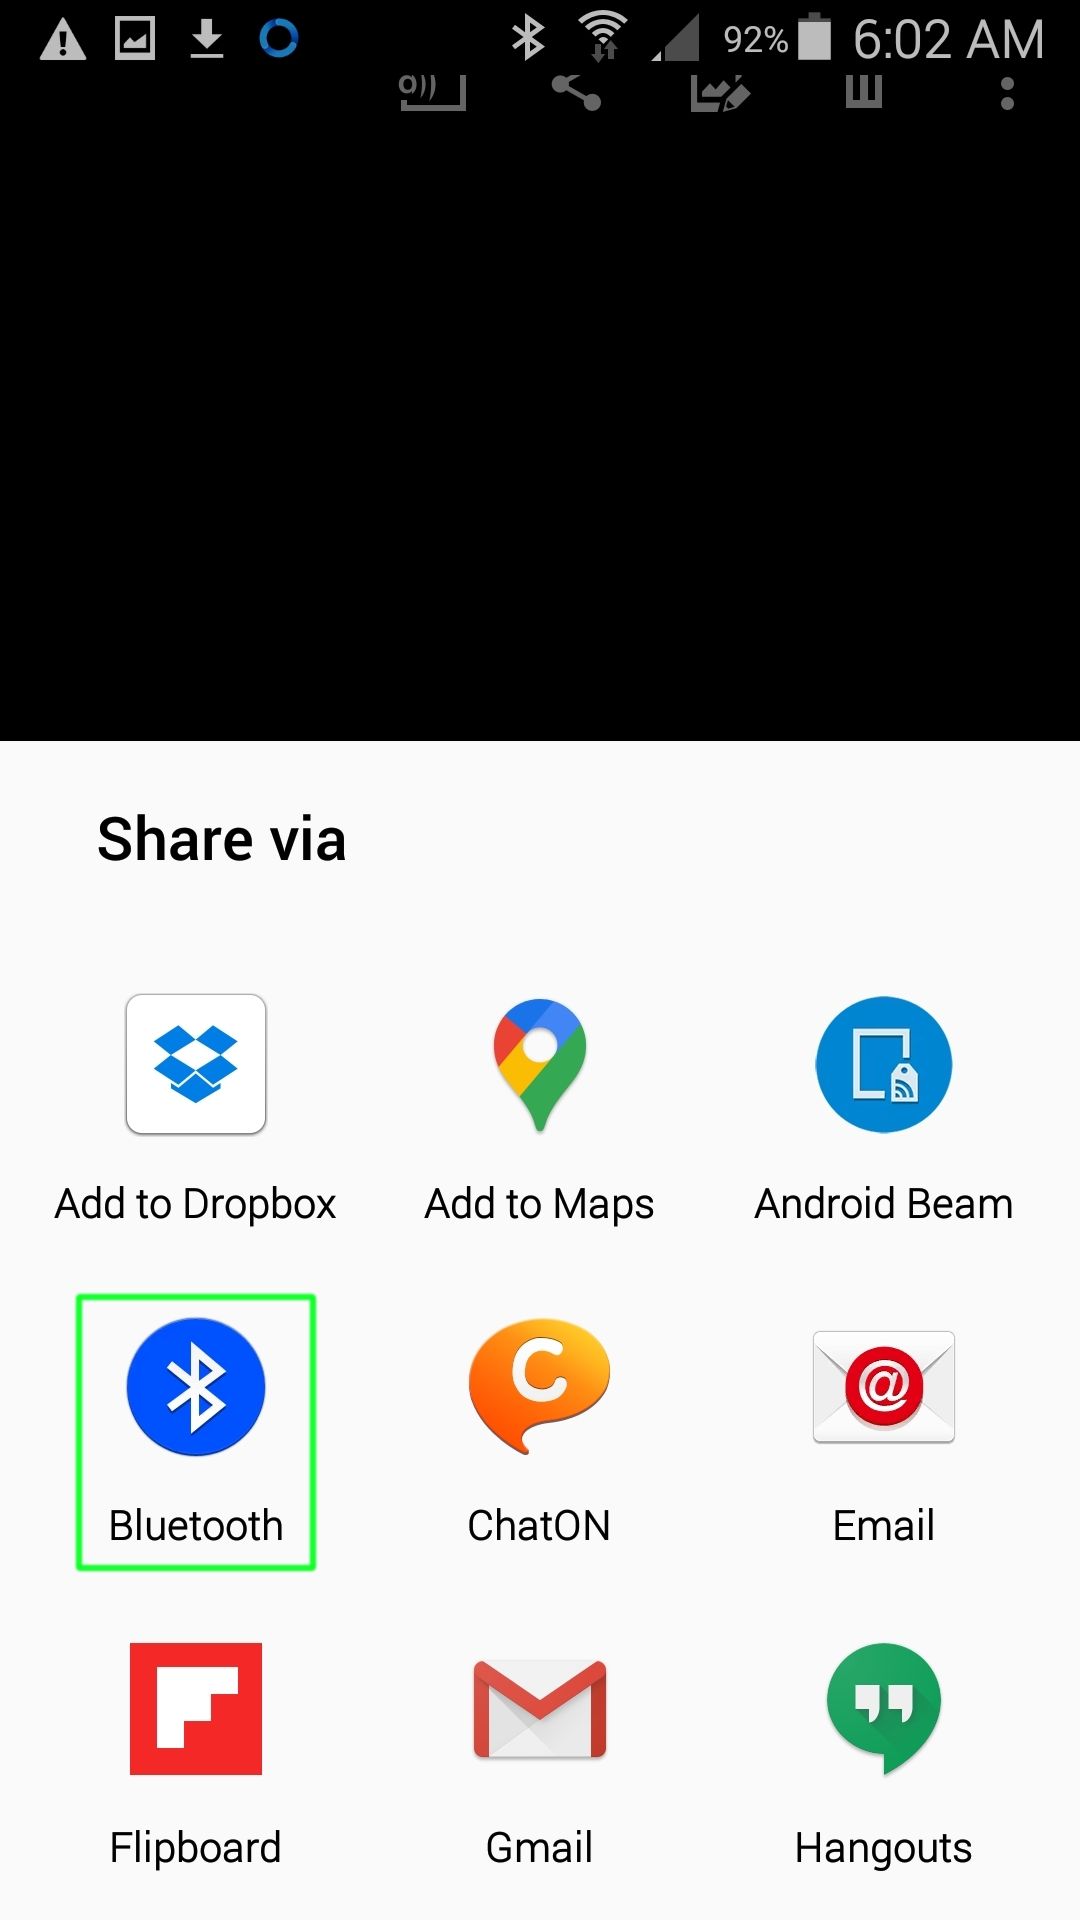 Android share via window with Bluetooth highlighted.